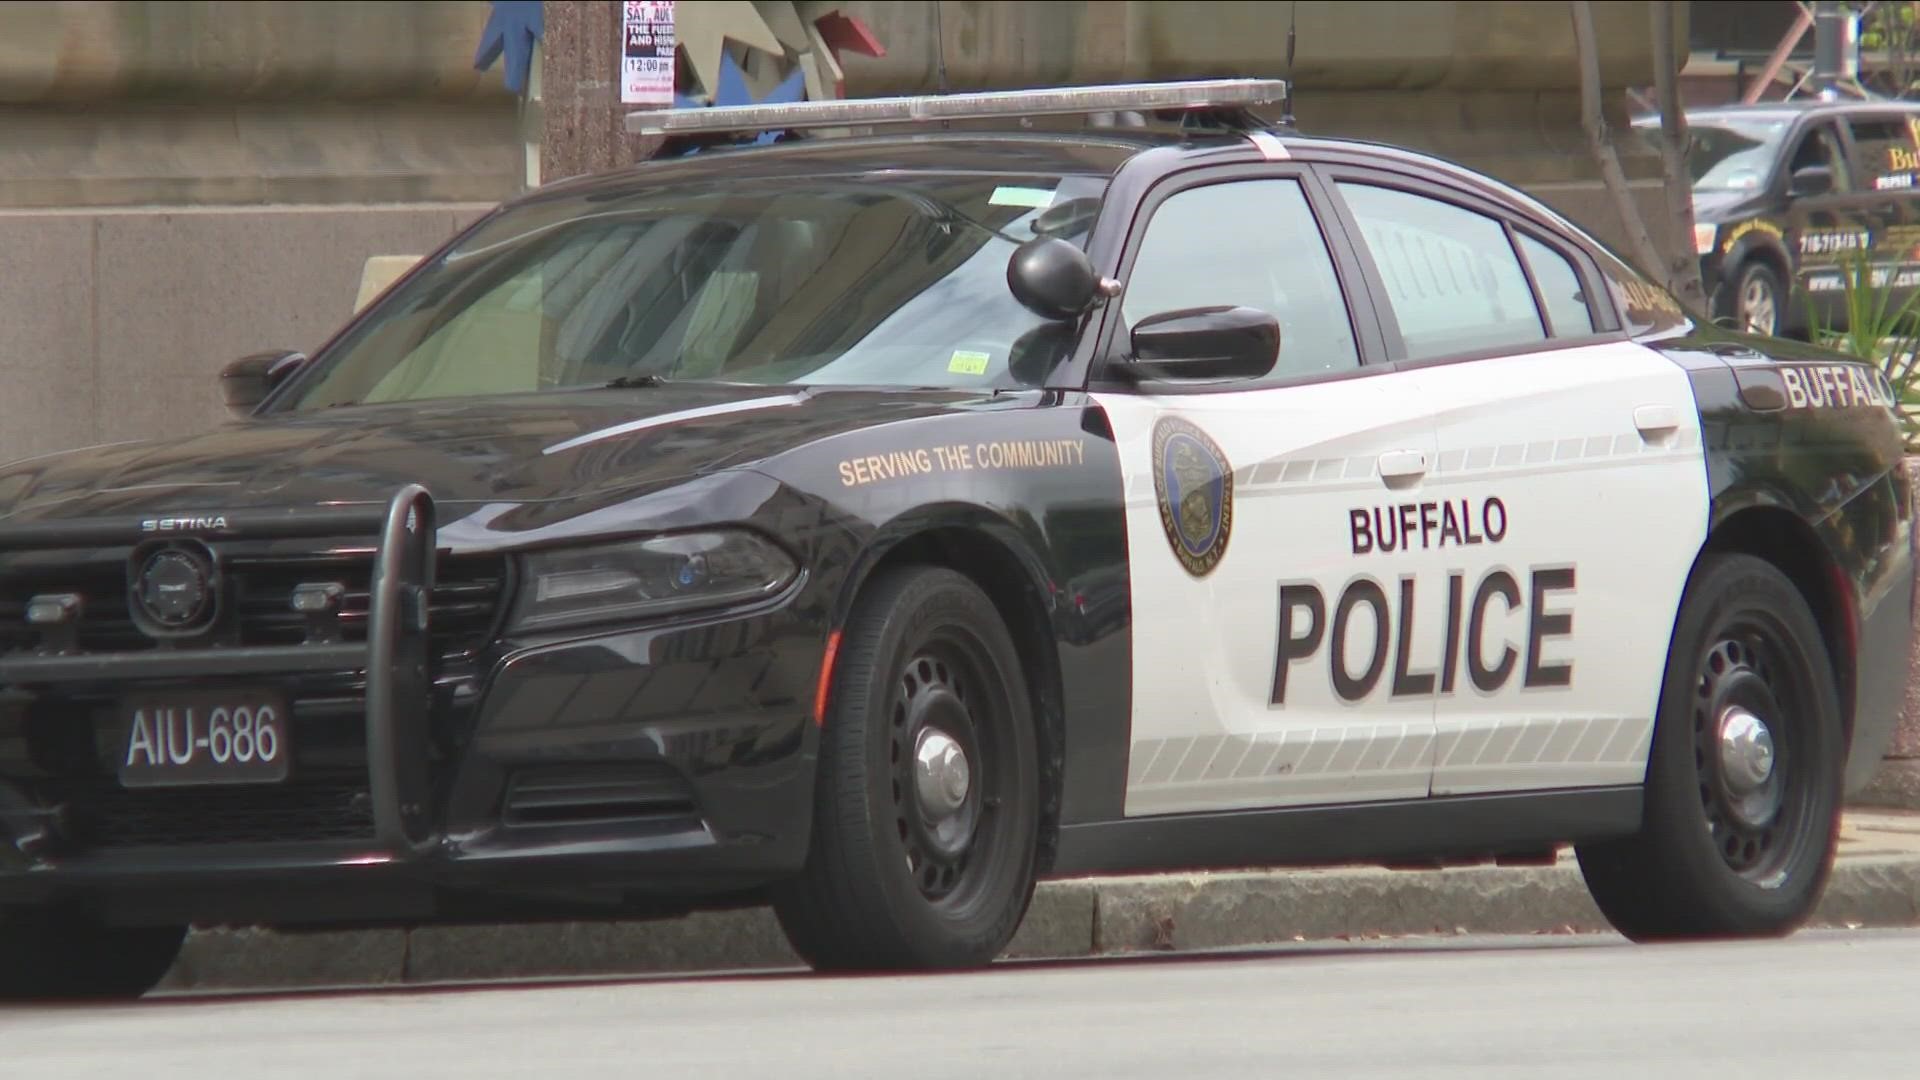 The lawsuit accuses the City of Buffalo and its police department of racially discriminatory and unconstitutional traffic enforcement policies and practices.